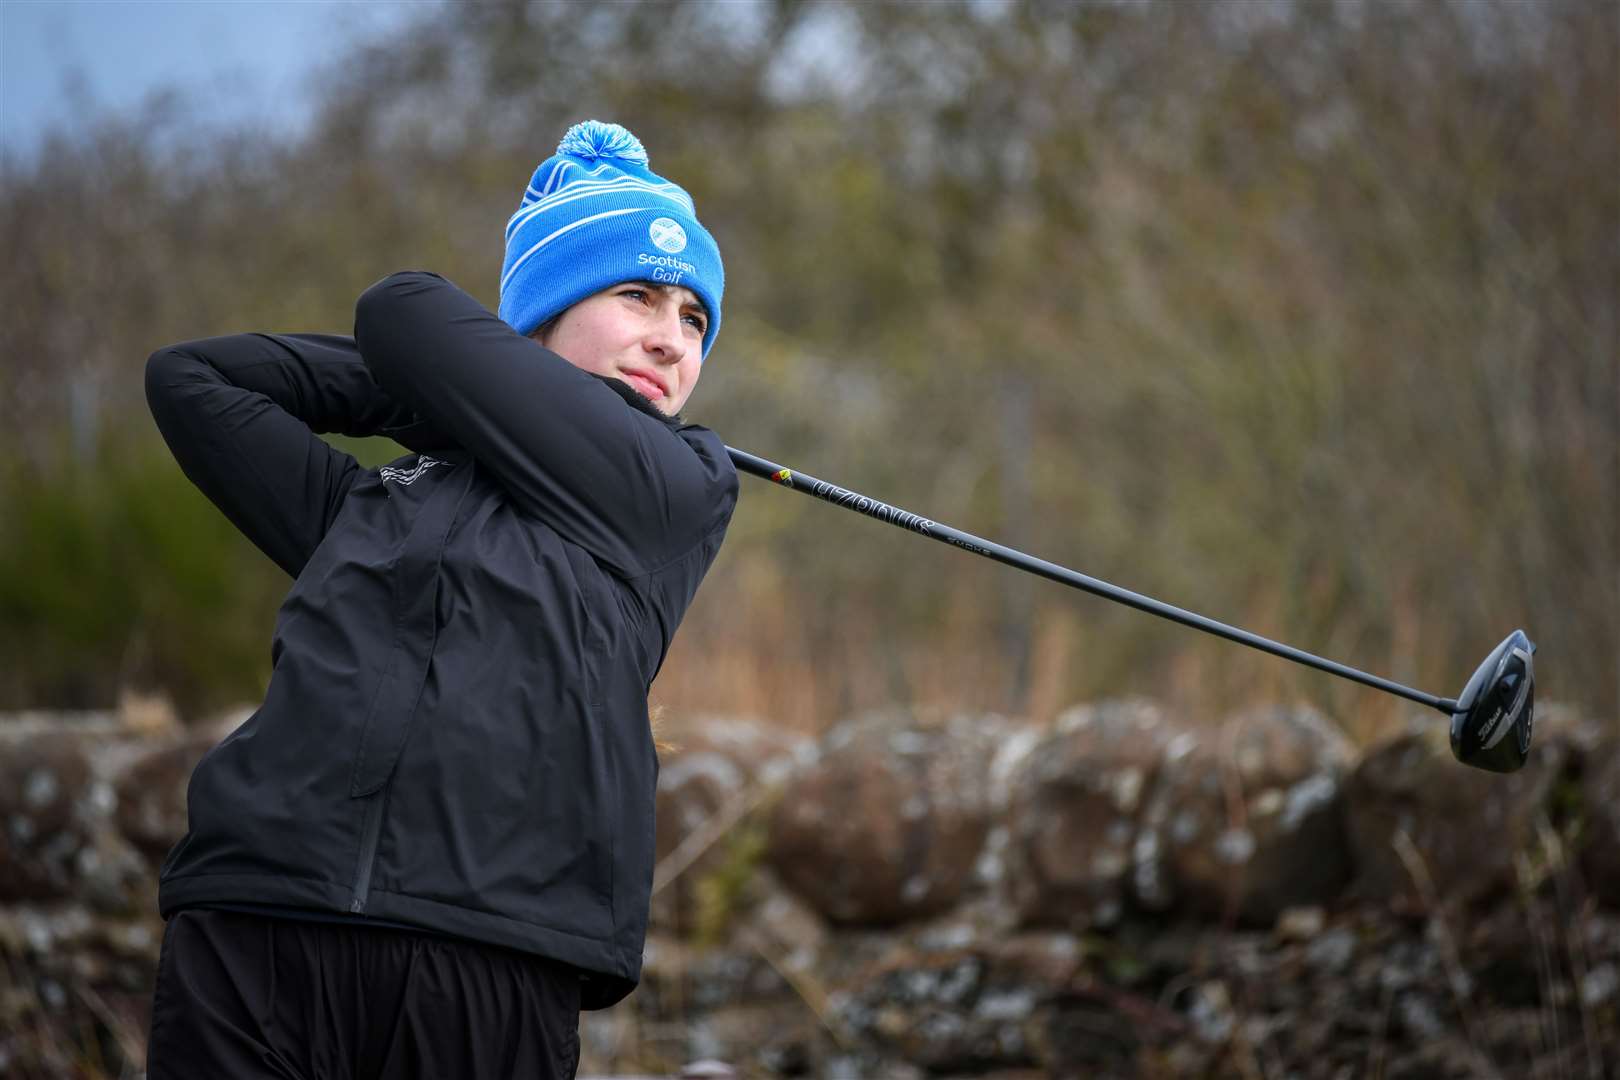 Summer Elliott hits a drive during the 2022 Scottish Girls' Open at Irvine Golf Club on April 6, 2022.